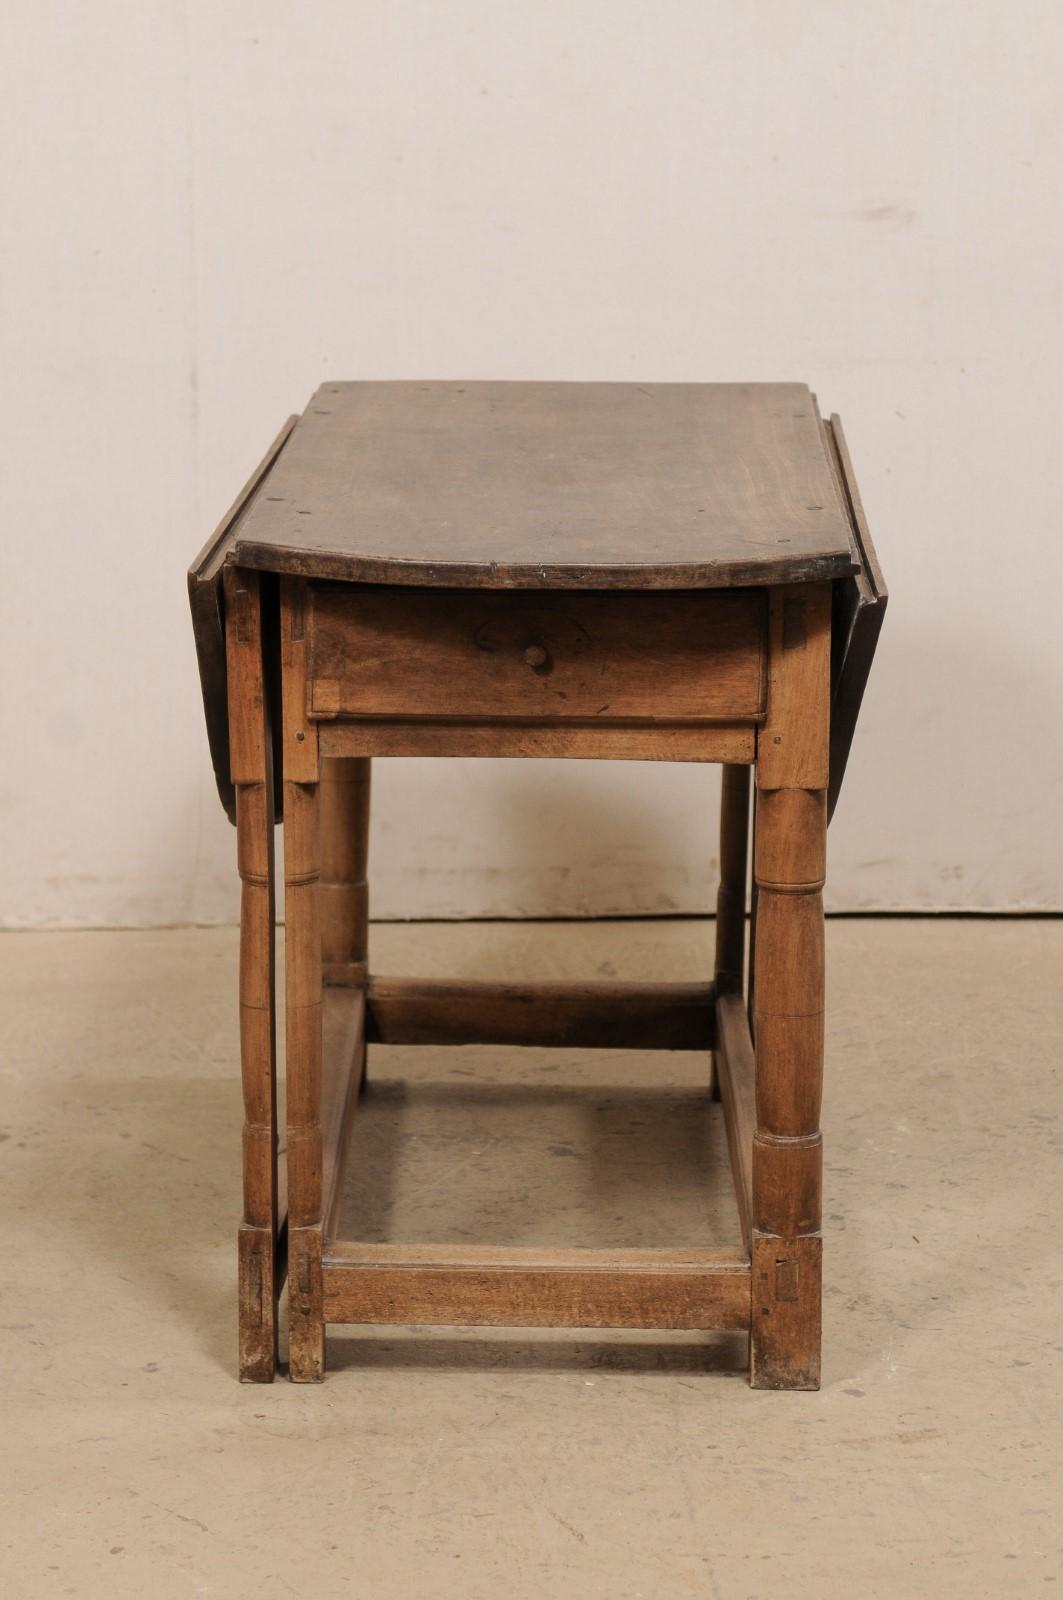 Italian Double Gate-Leg Table w/Drop Leaves on Either Side, Turn of 18th/19th C. For Sale 3